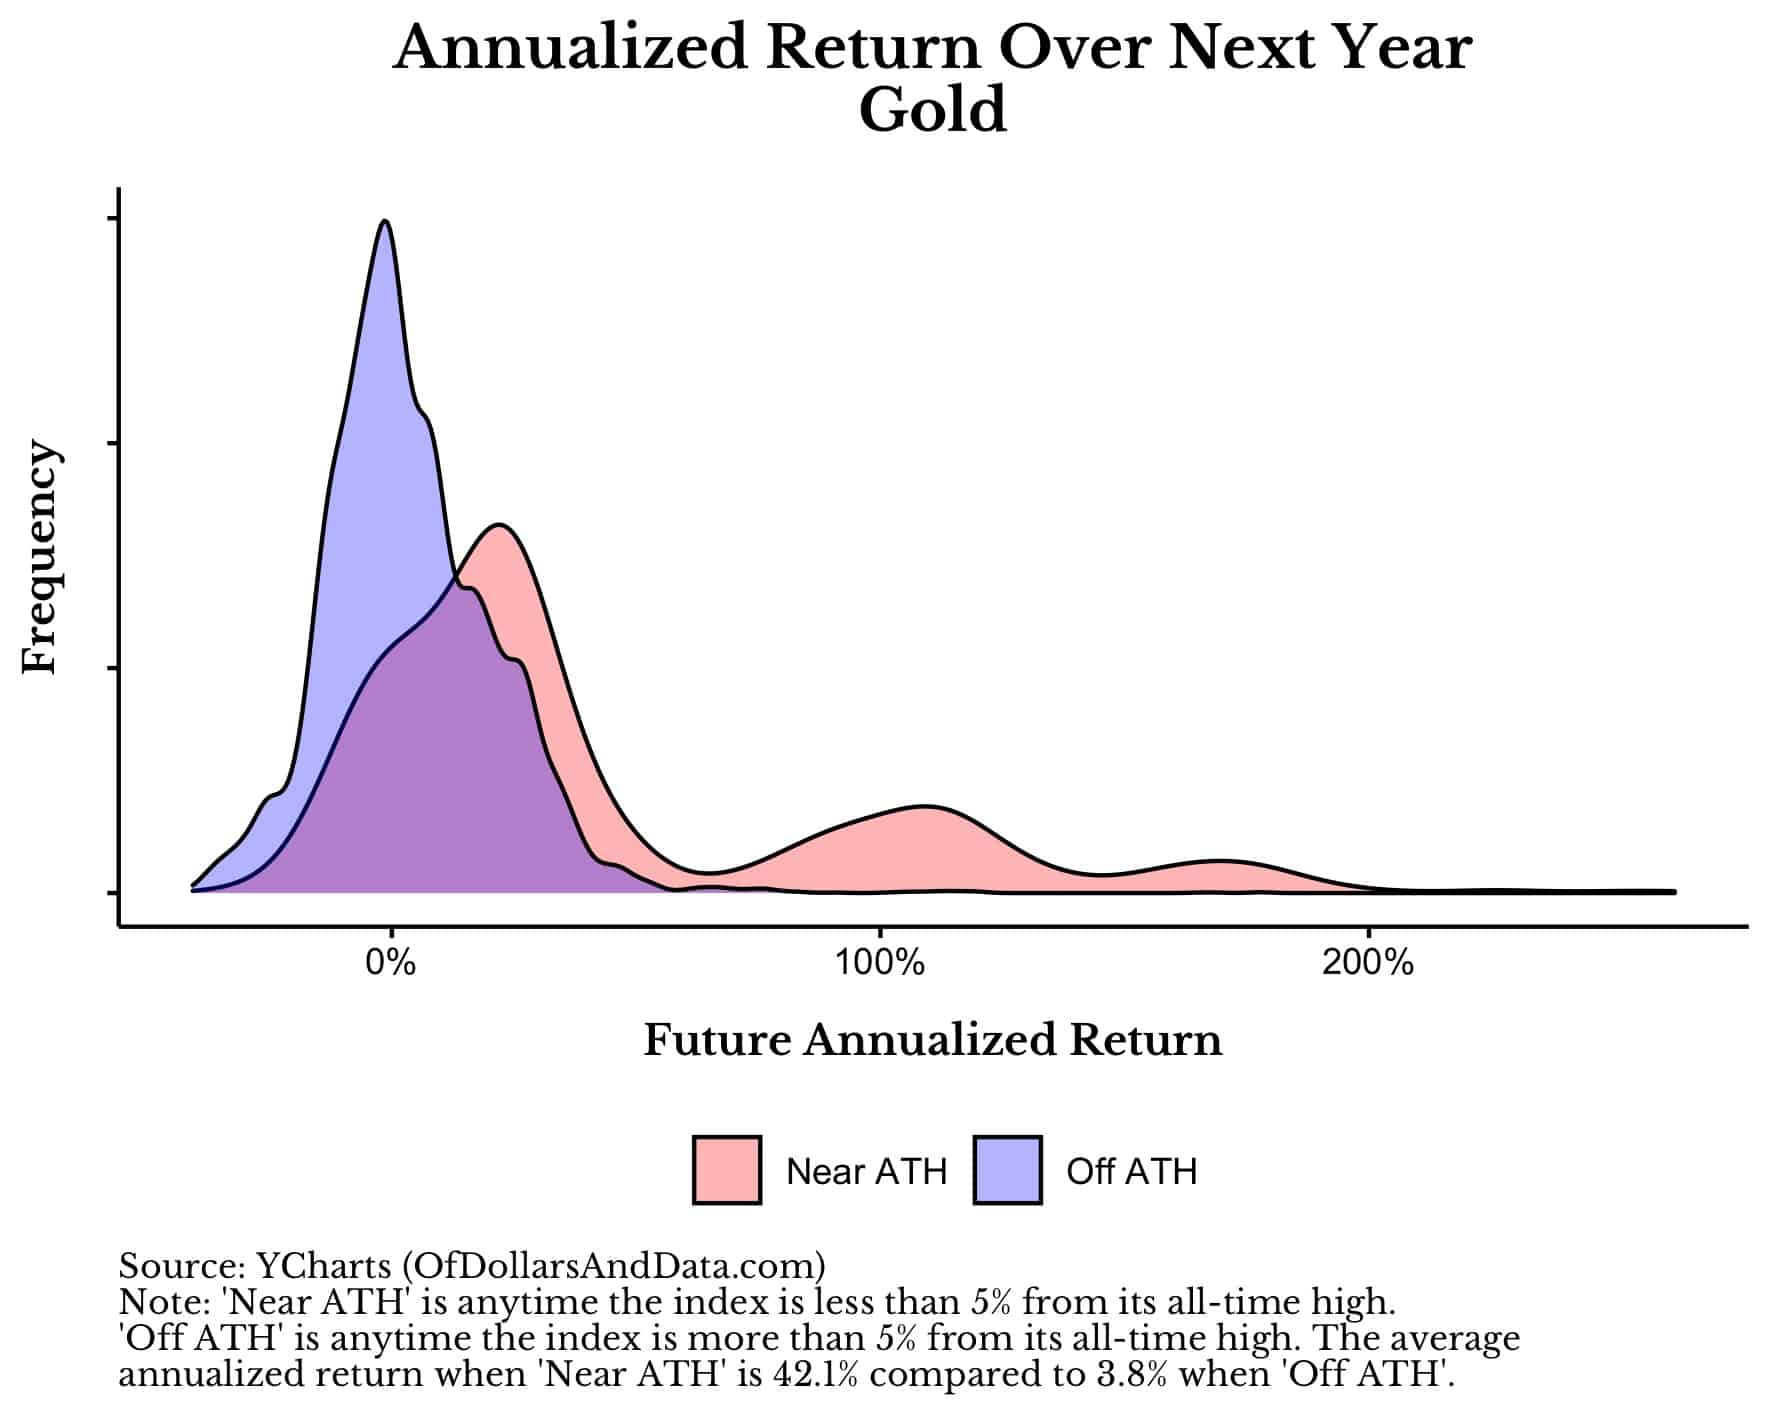 Annualized return distributions for gold over the next year near and off all-time highs